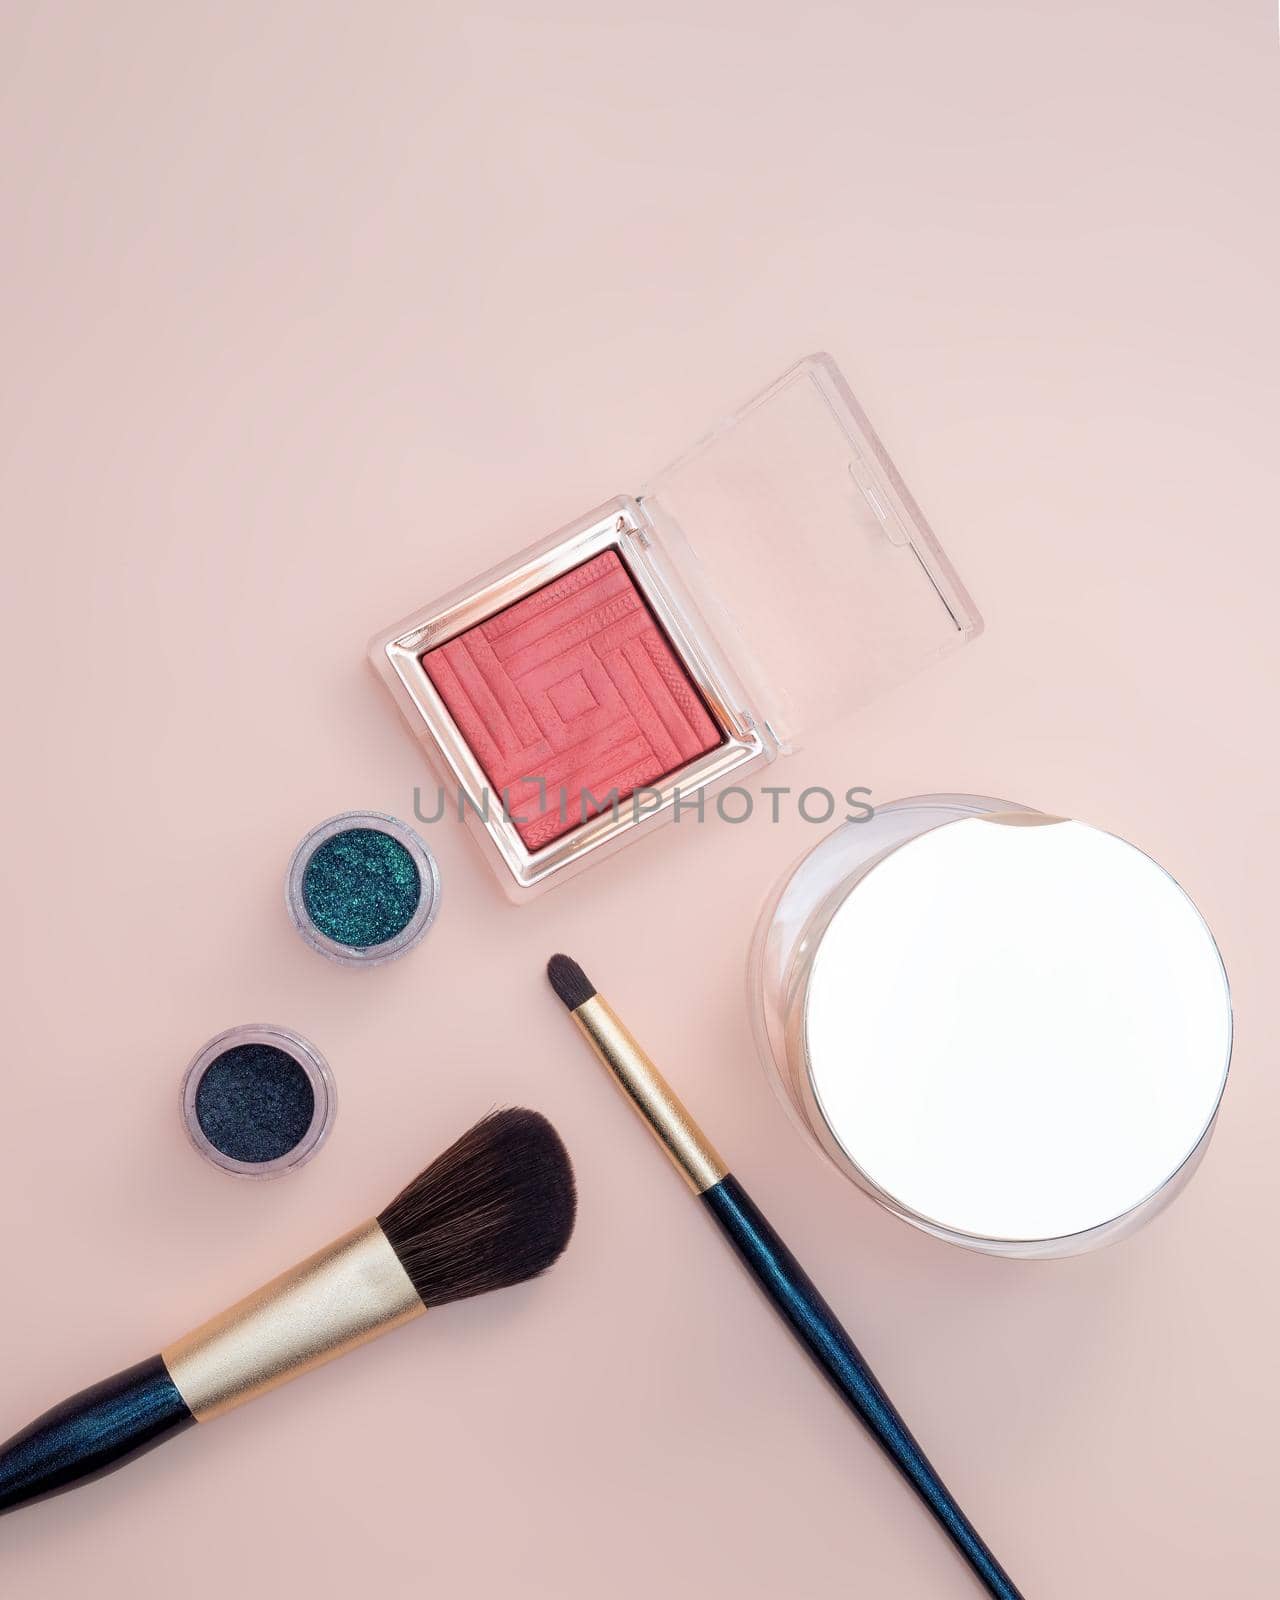 Composition with decorative makeup products golden brushes and colorful eye shadows on pastel pink background. by Andre1ns